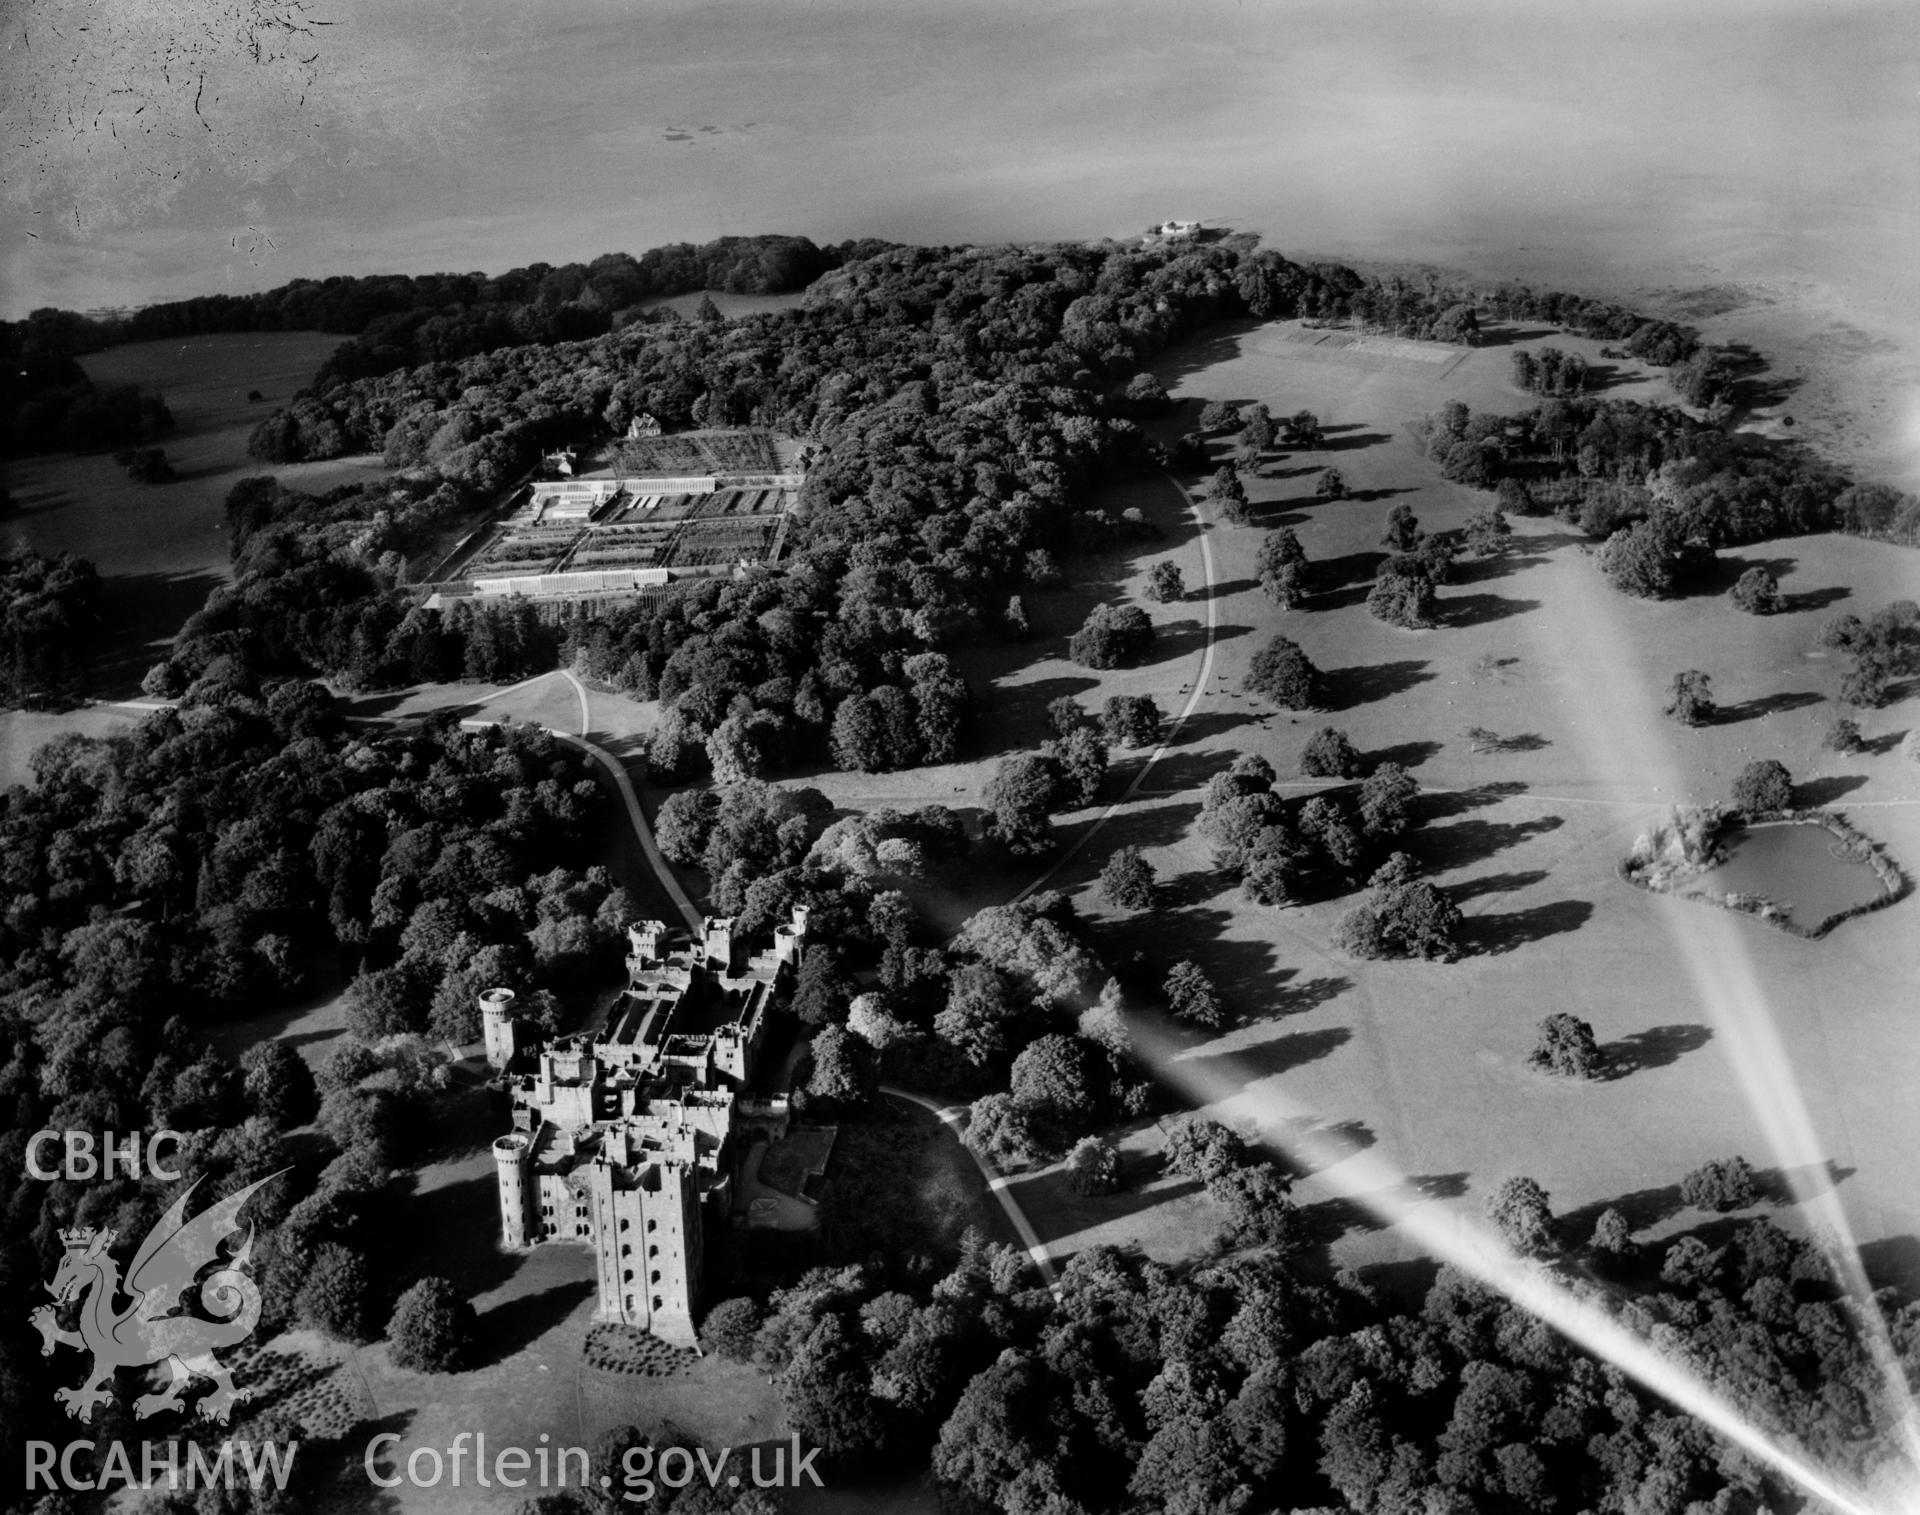 View of Penrhyn Castle showing gardens and bathhouse, oblique aerial view. 5?x4? black and white glass plate negative.